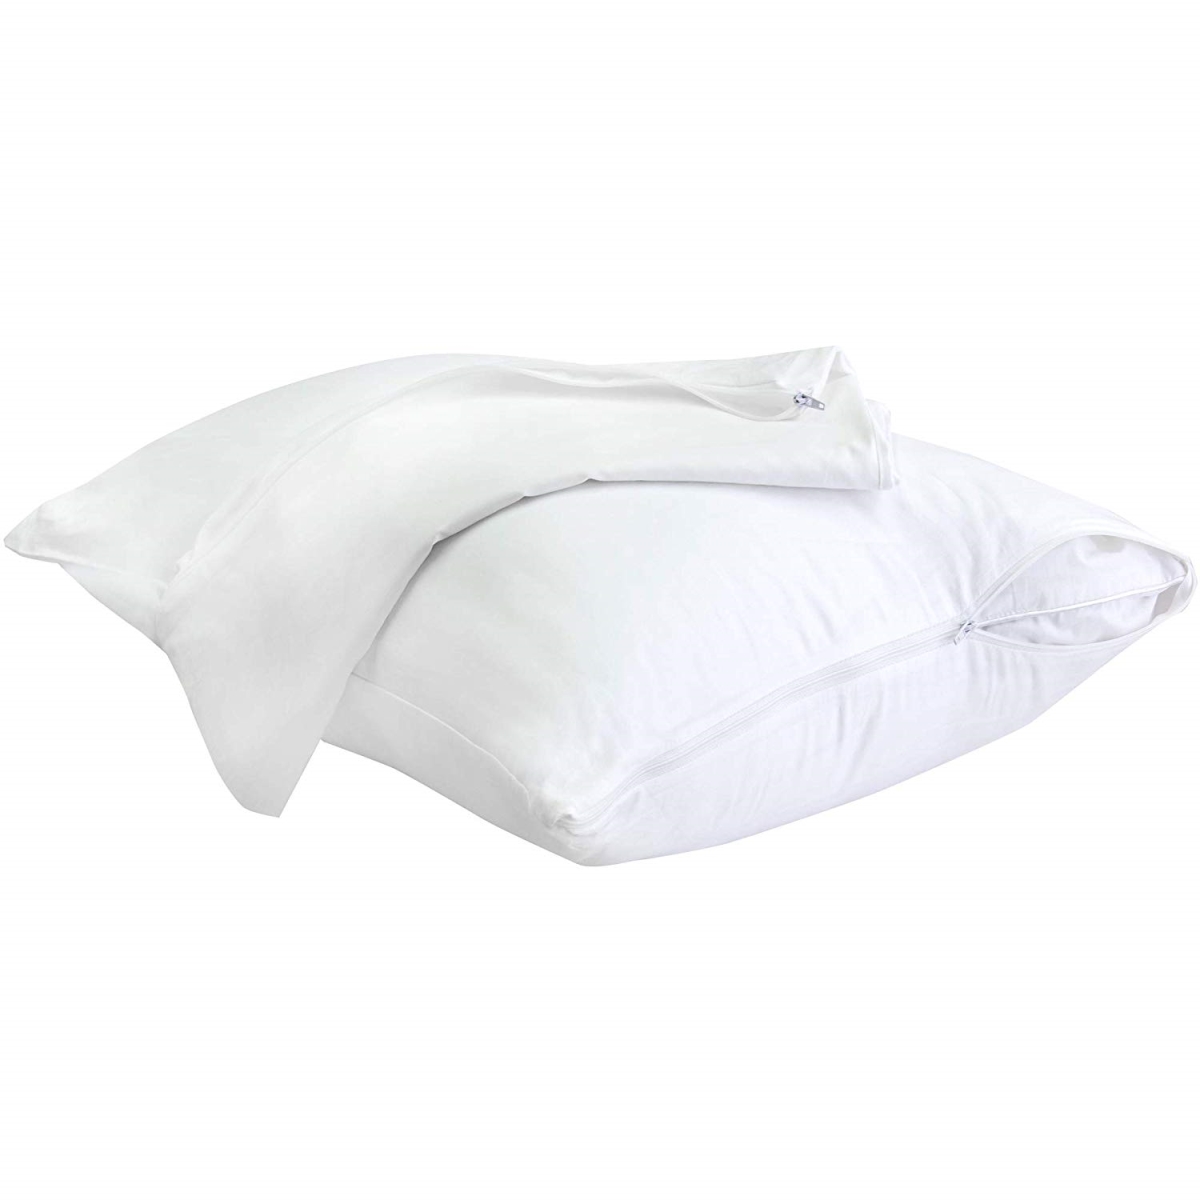 733412 Sleep Solutions By Stain Resistant Cotton Pillow Protector - White, Standard Size - Pack Of 2